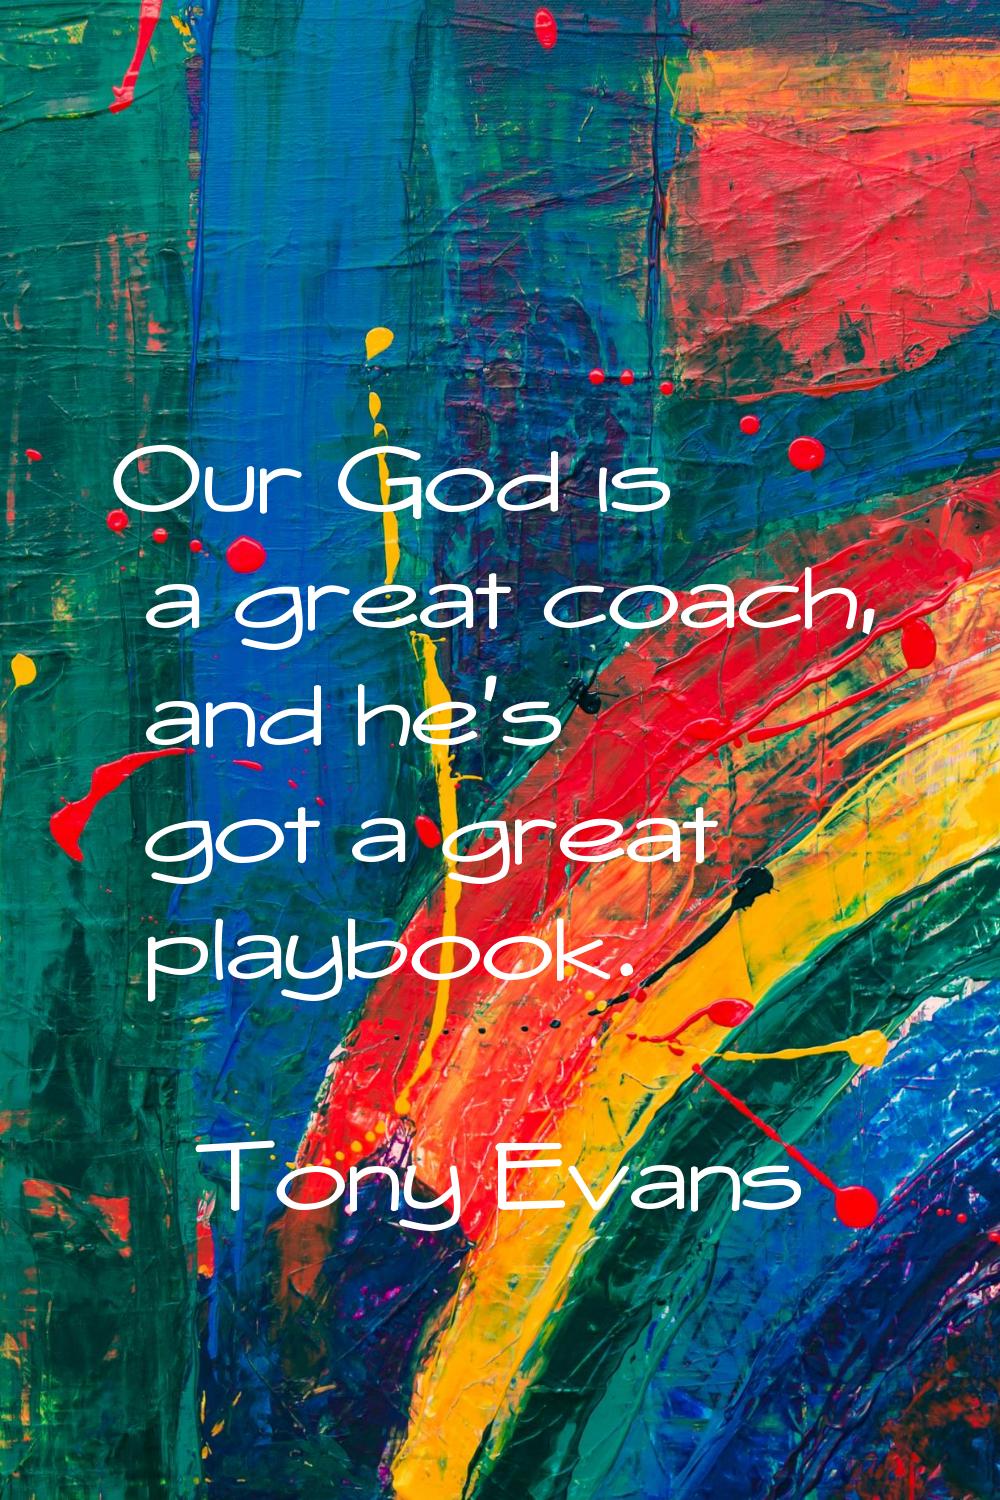 Our God is a great coach, and he's got a great playbook.